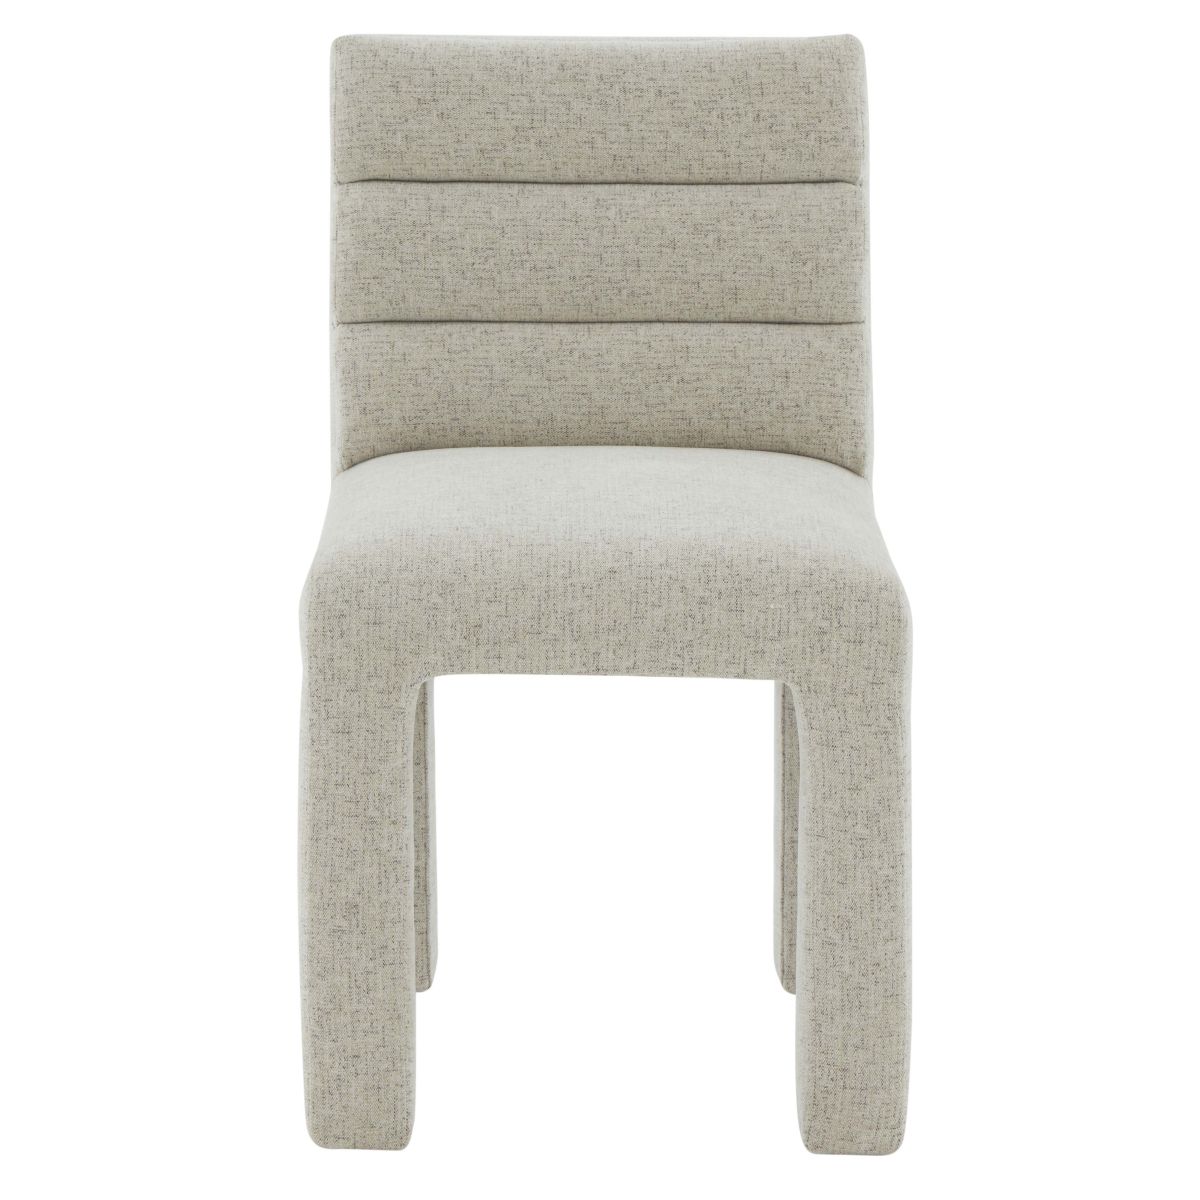 Safavieh Couture Pietro Channel Tufted Dining Chair - Taupe